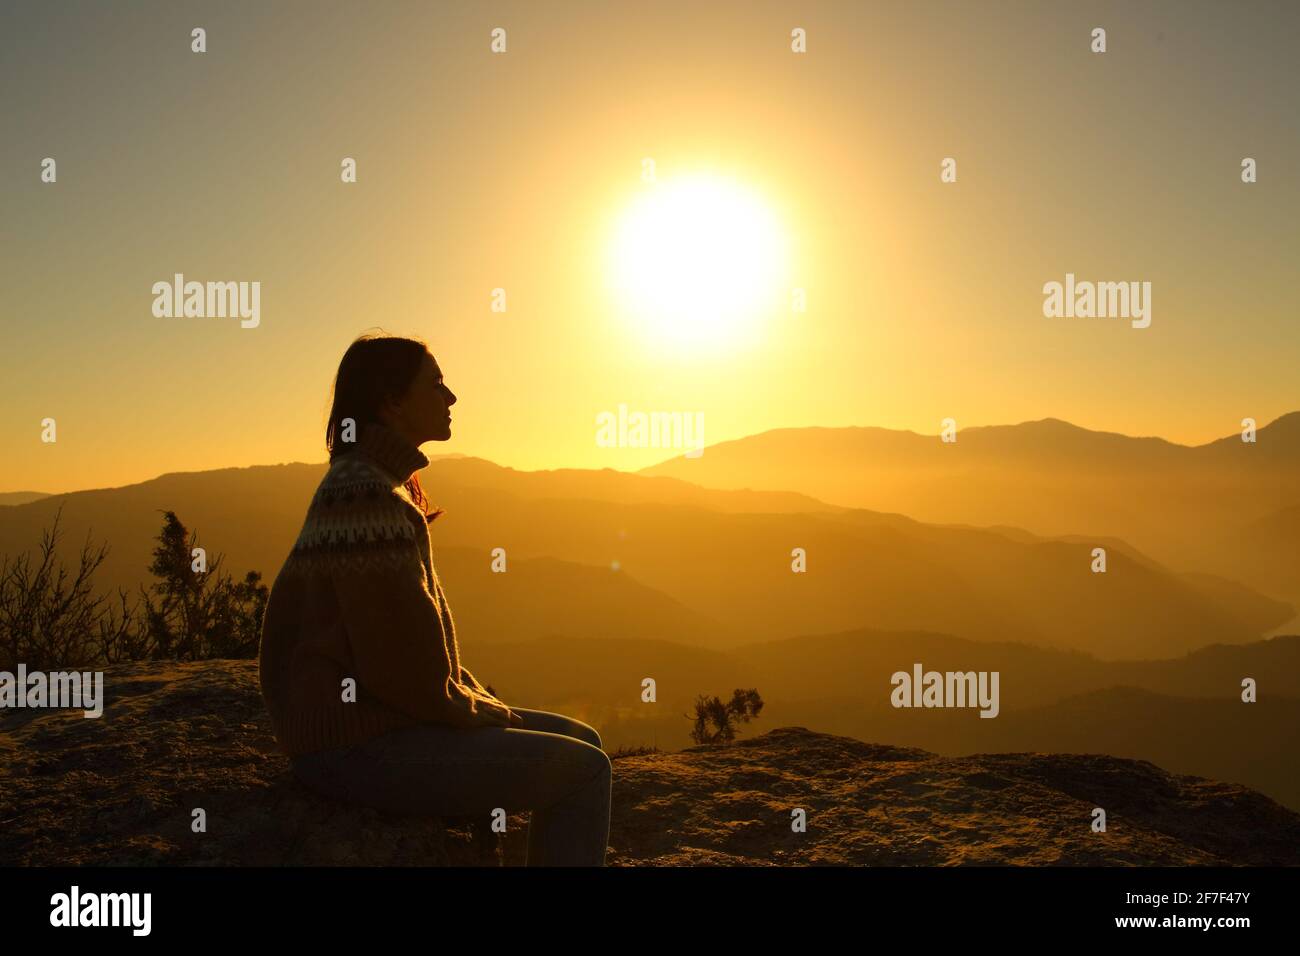 Side view portrait of a silhouette of a woman contemplating nature at sunset Stock Photo